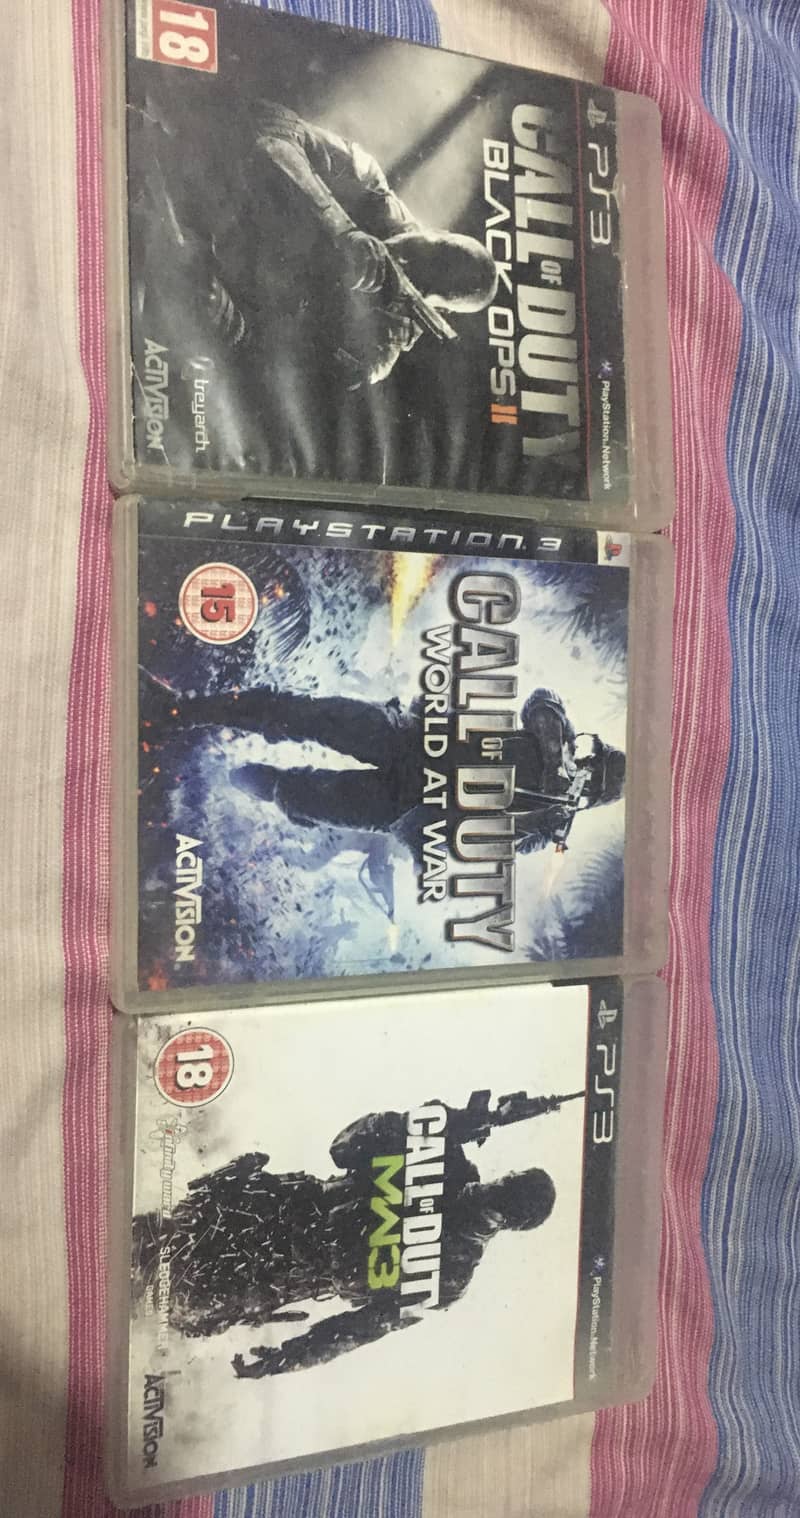 PS3 CDs for sale 2